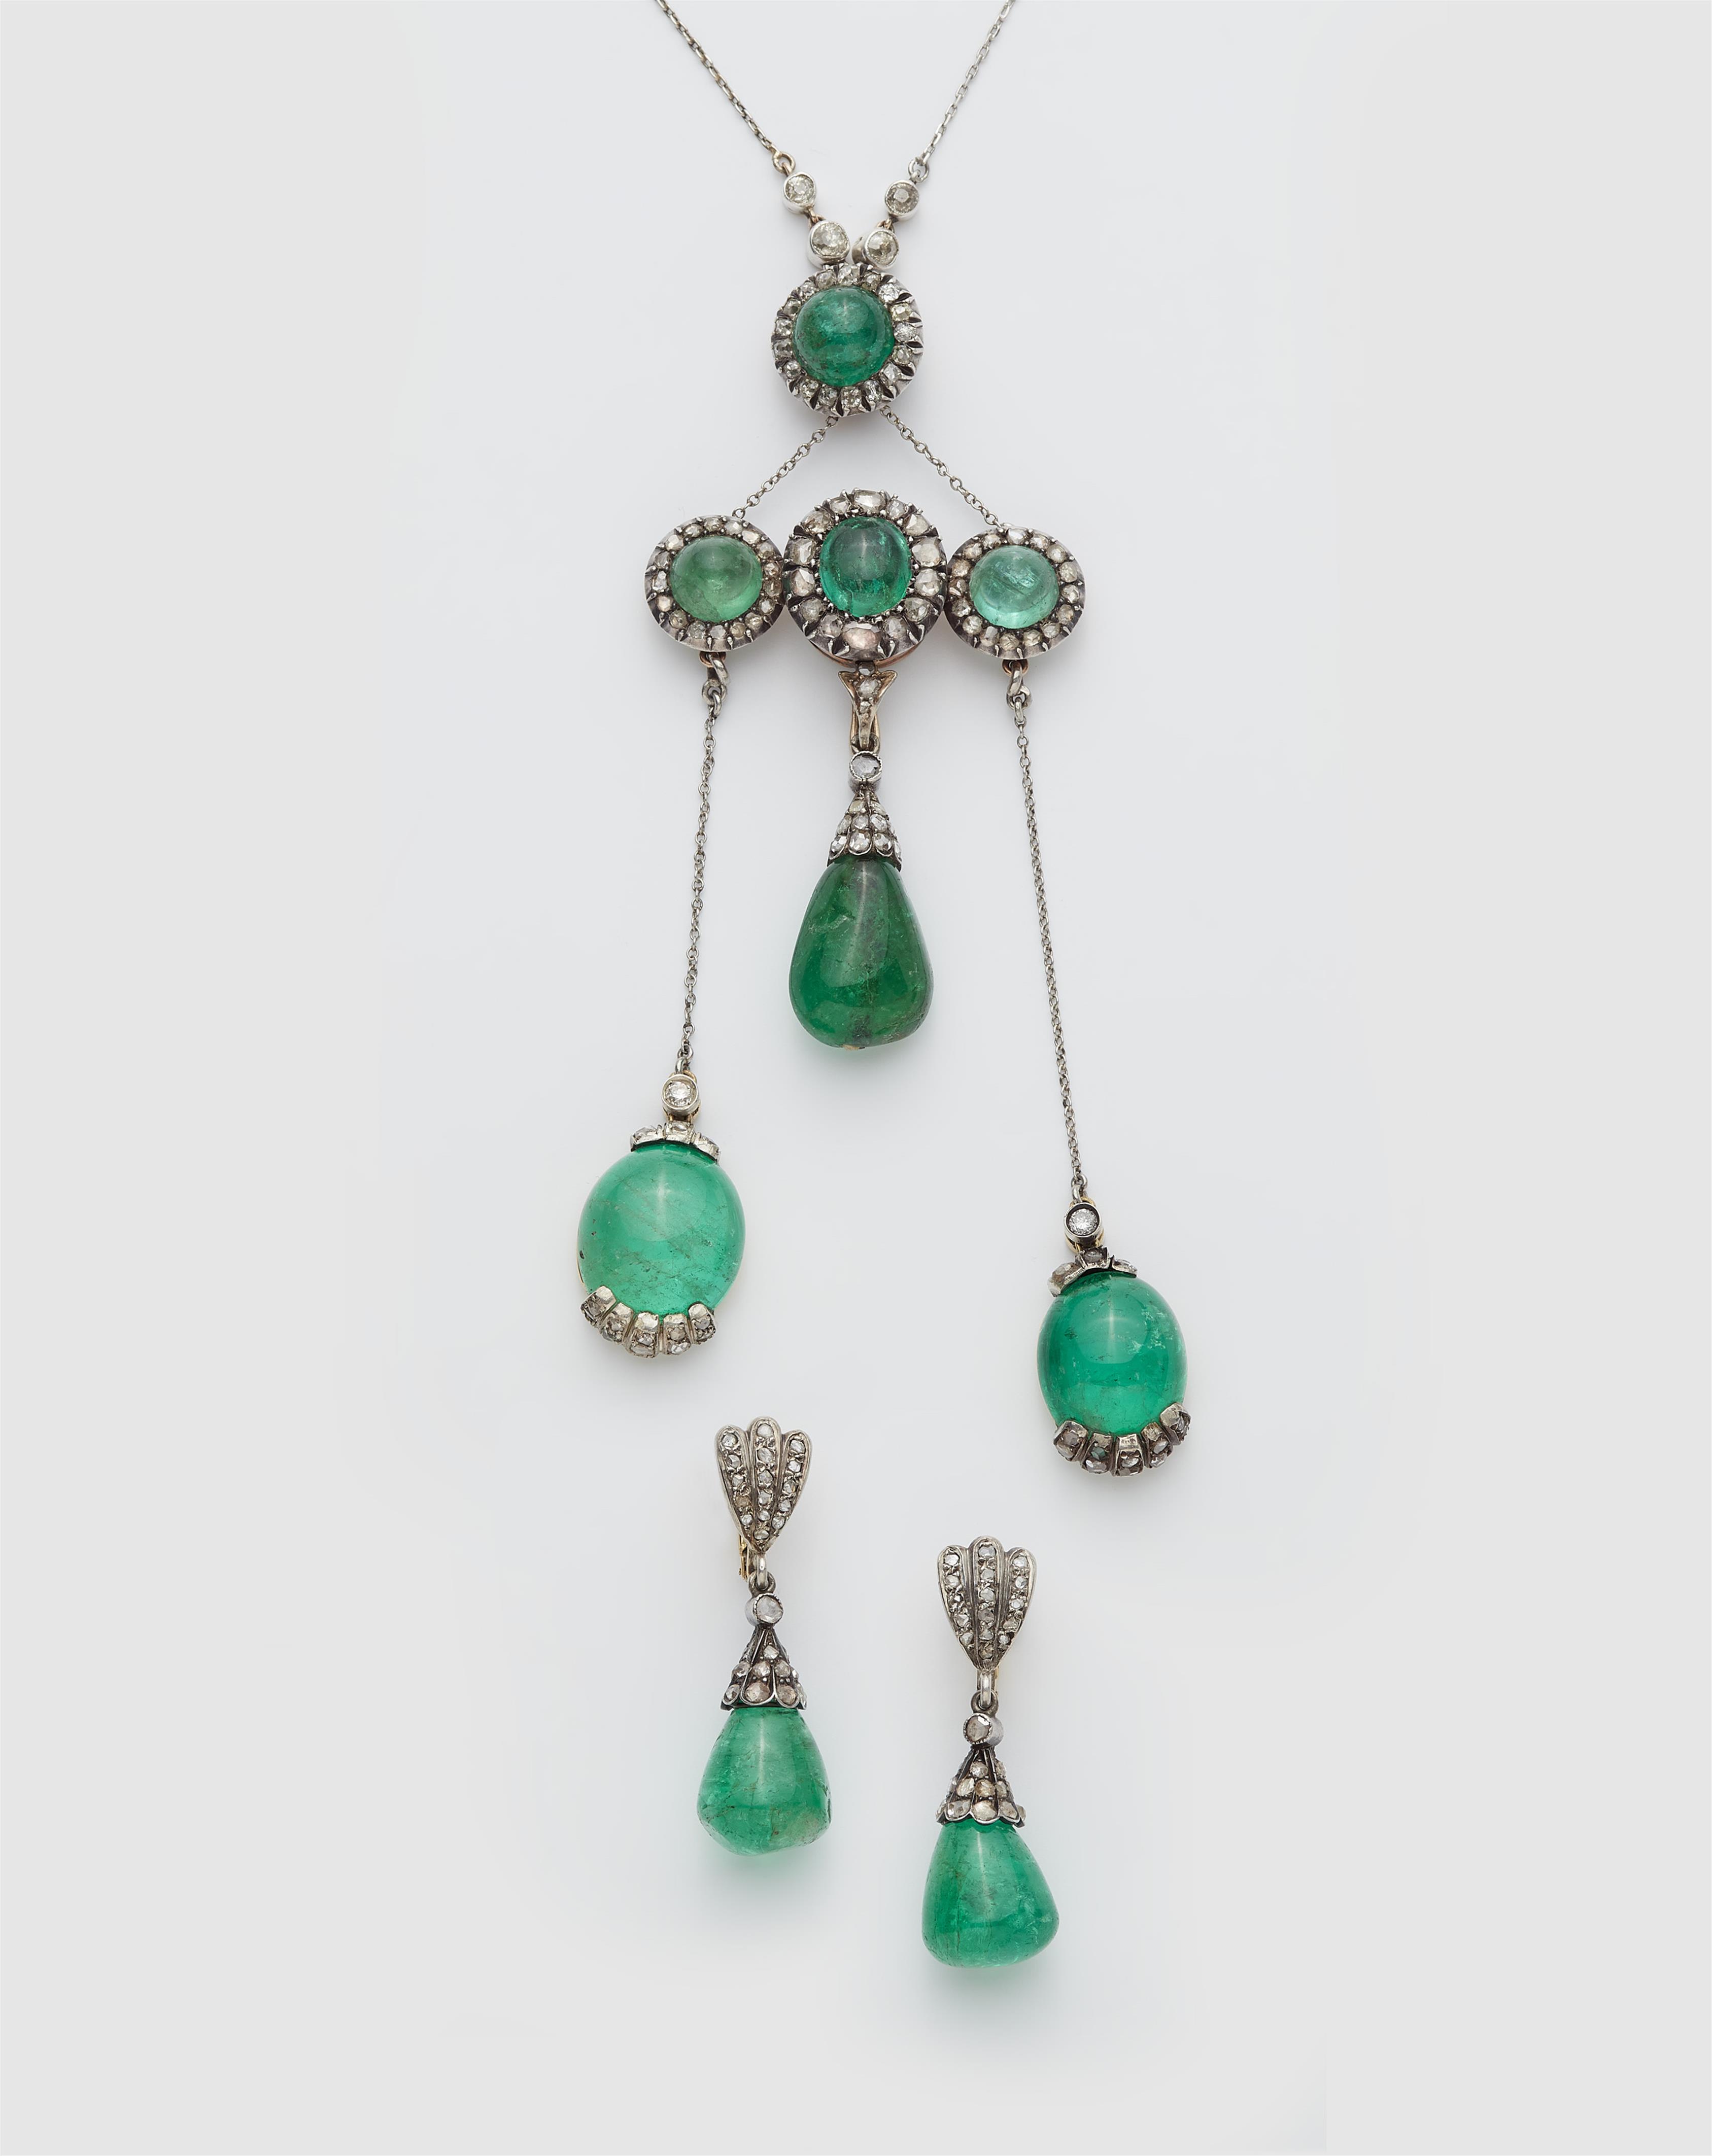 Parts of Italian antique silver 14k gold, emerald and diamond jewellery set comprising a multi-part pendant and a pair of earrings. - image-1